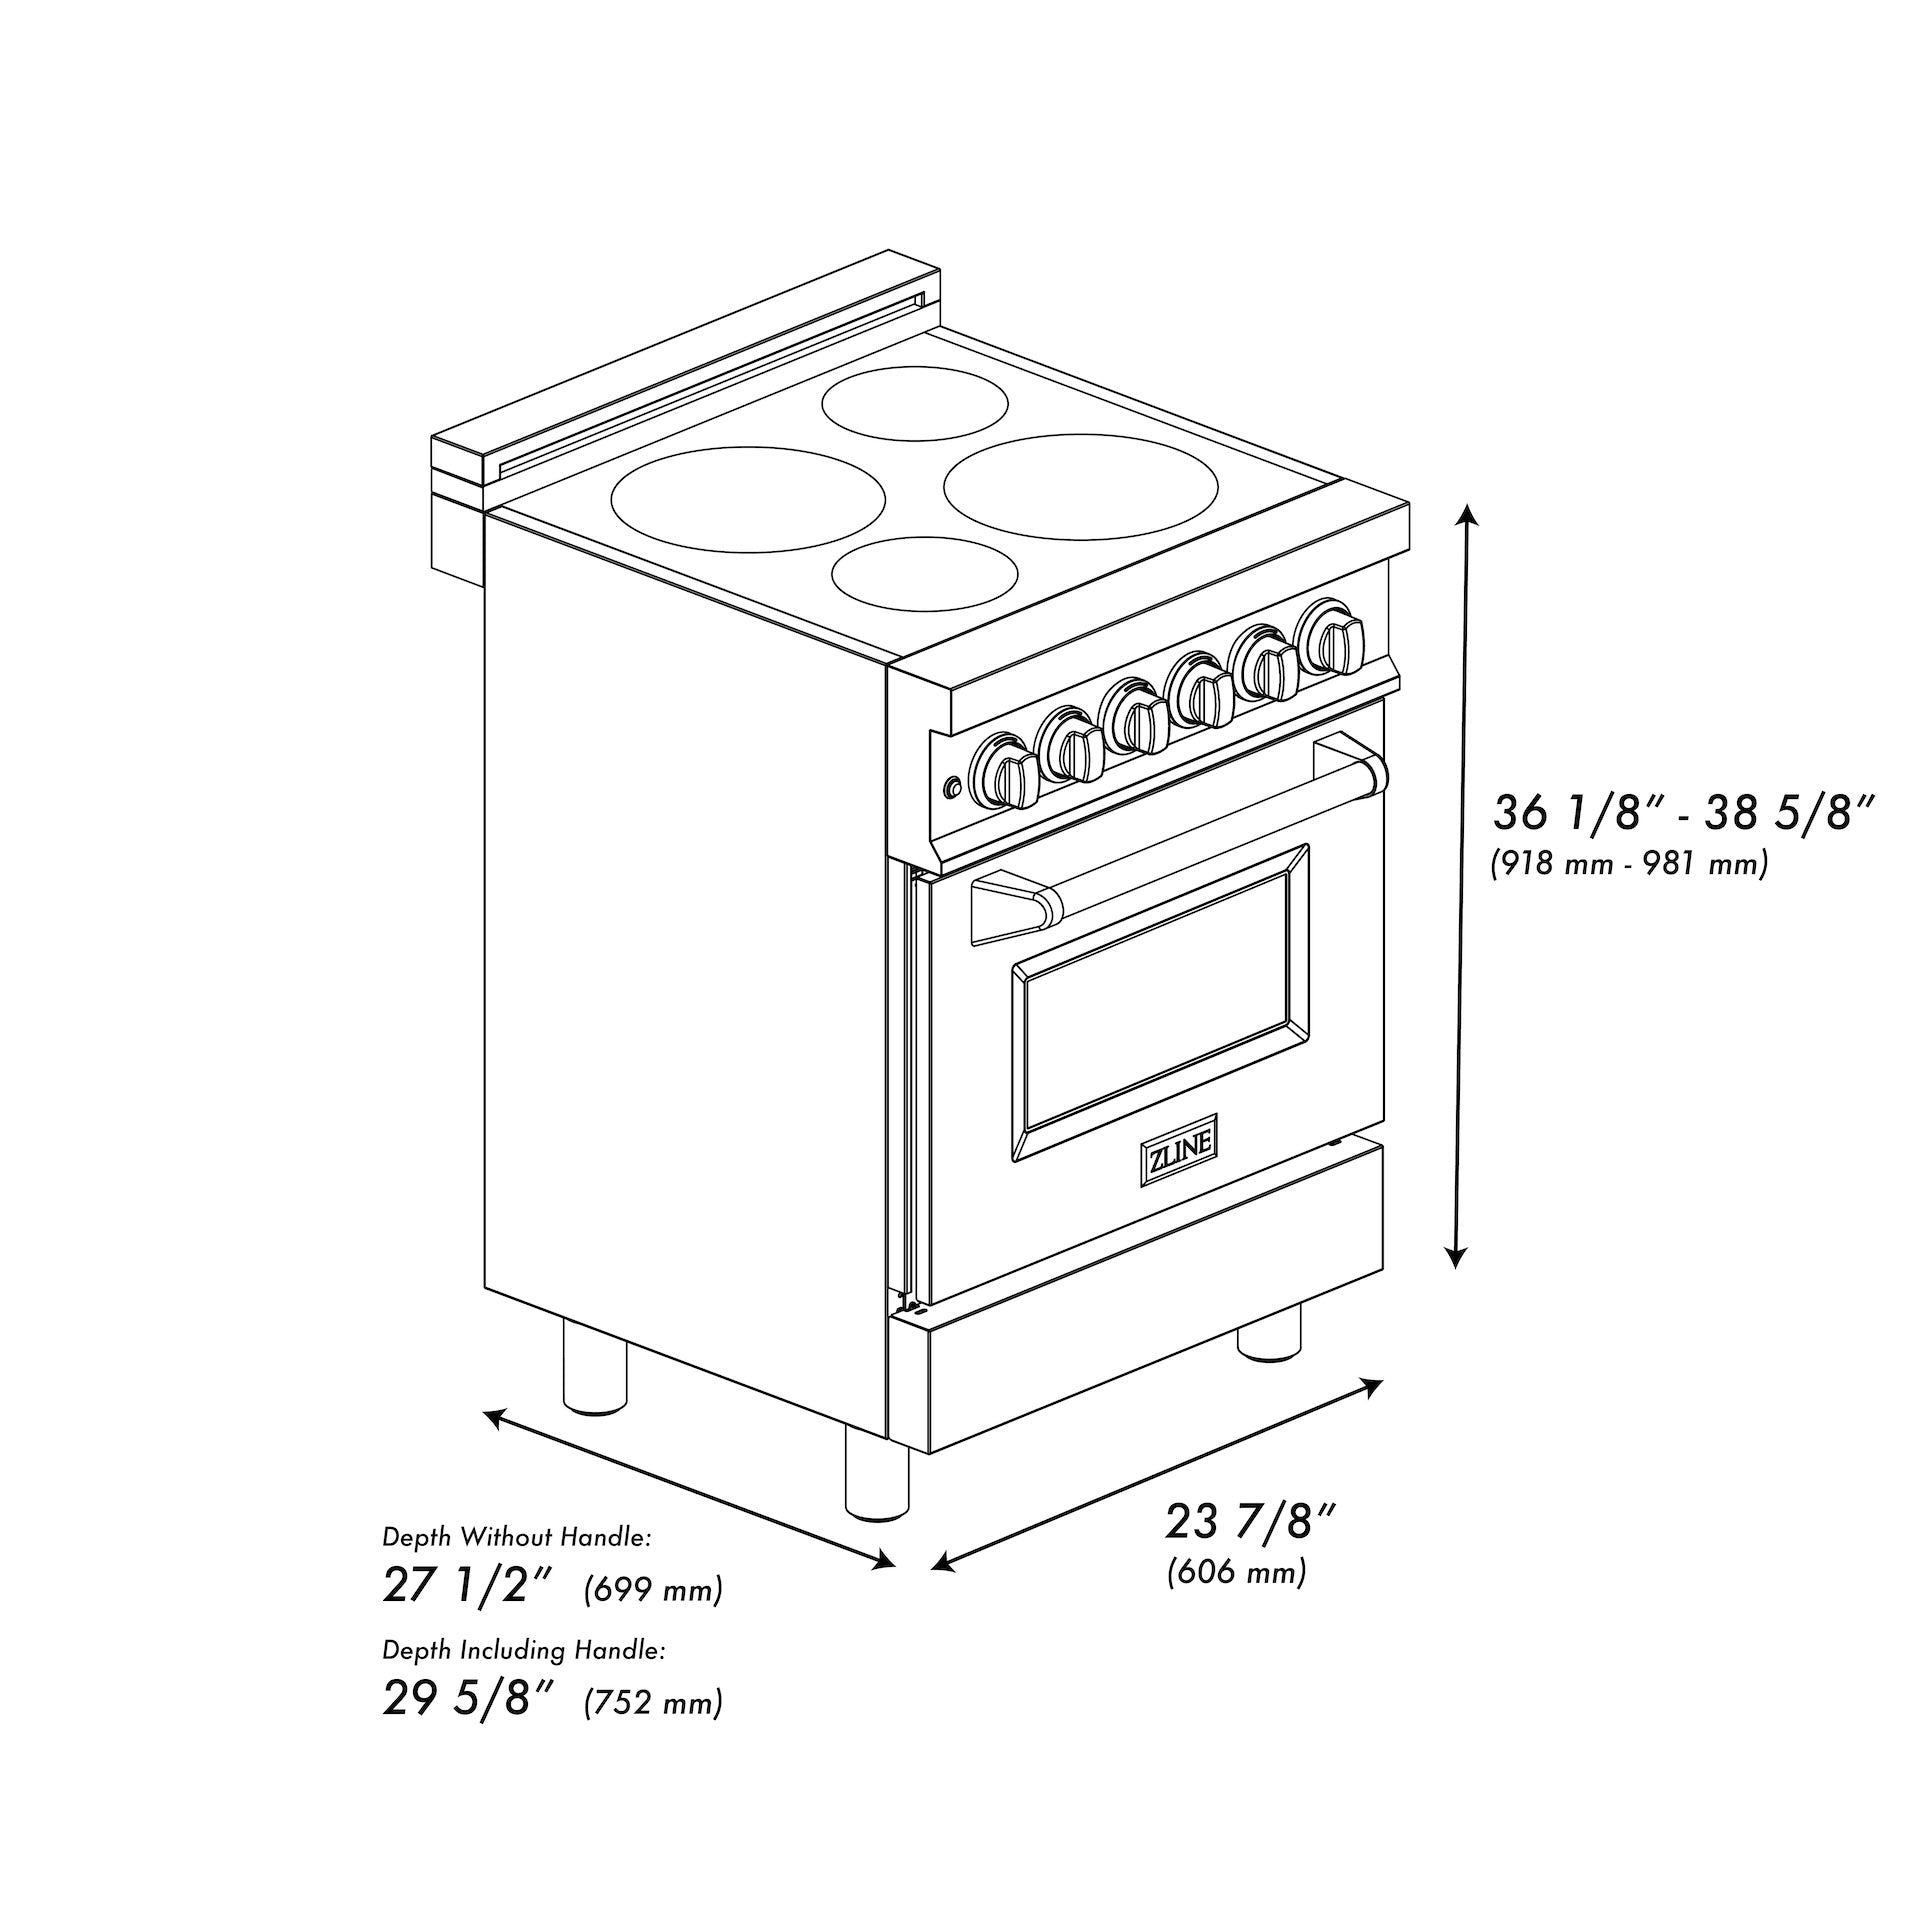 ZLINE 24 in. 2.8 cu. ft. Induction Range with a 4 Element Stove and Electric Oven in Black Matte (RAIND-BLM-24) dimensional diagram with measurements.